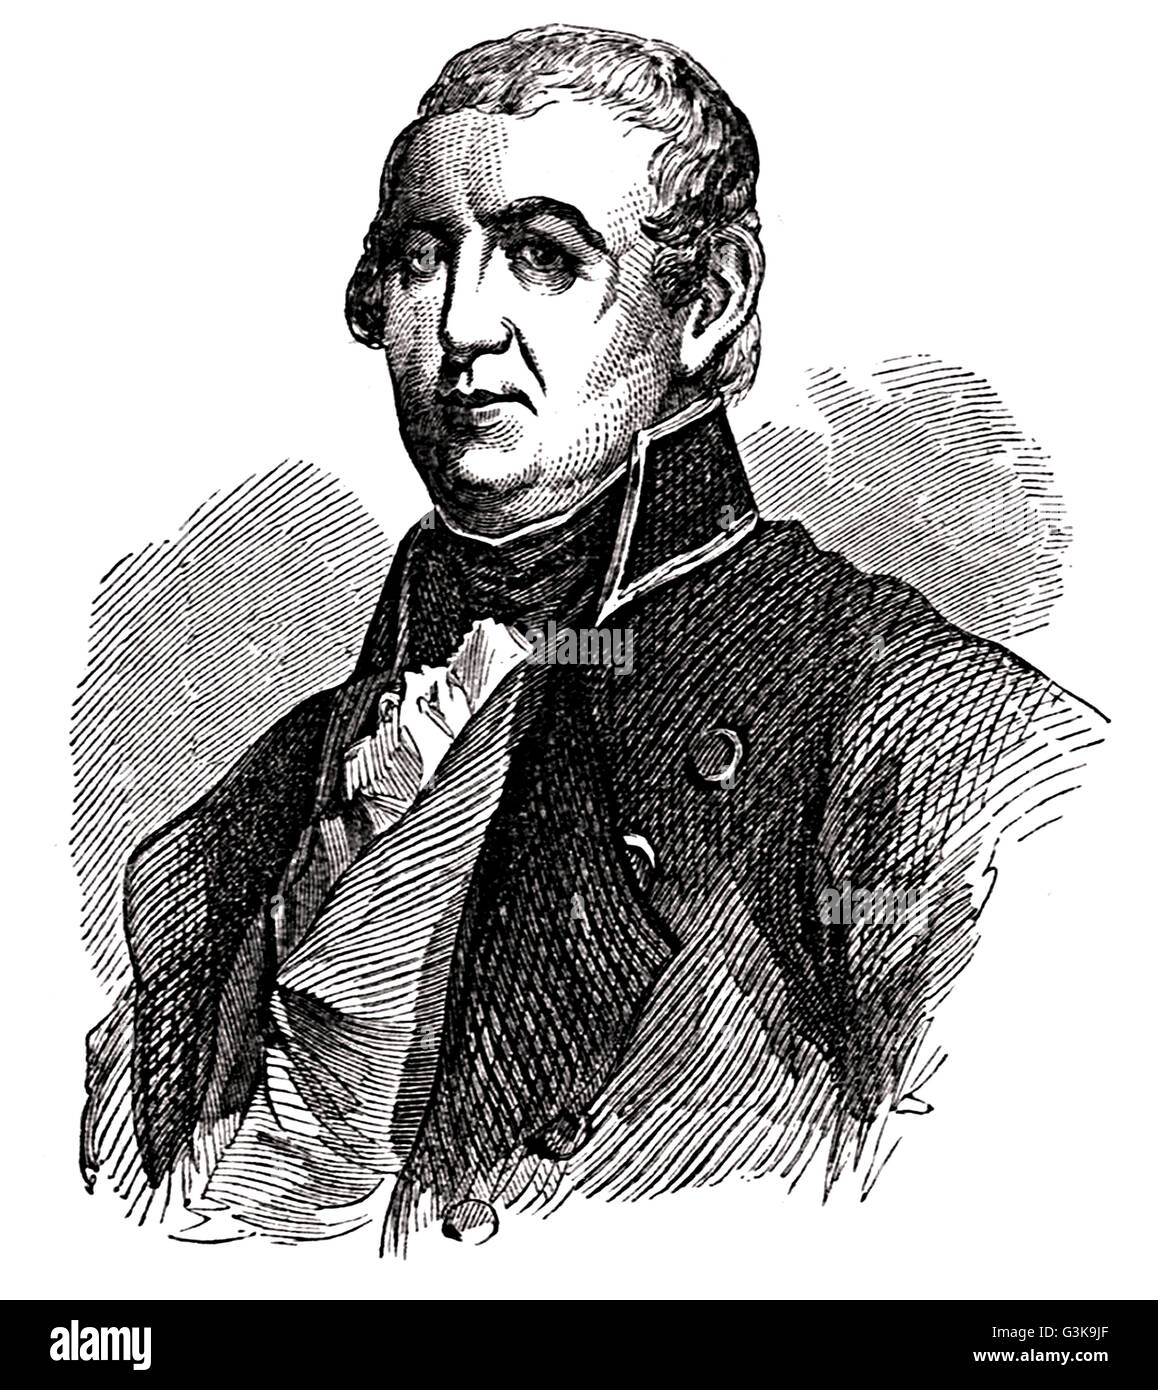 Isaac Shelby, 1750 - 1826 Banque D'Images